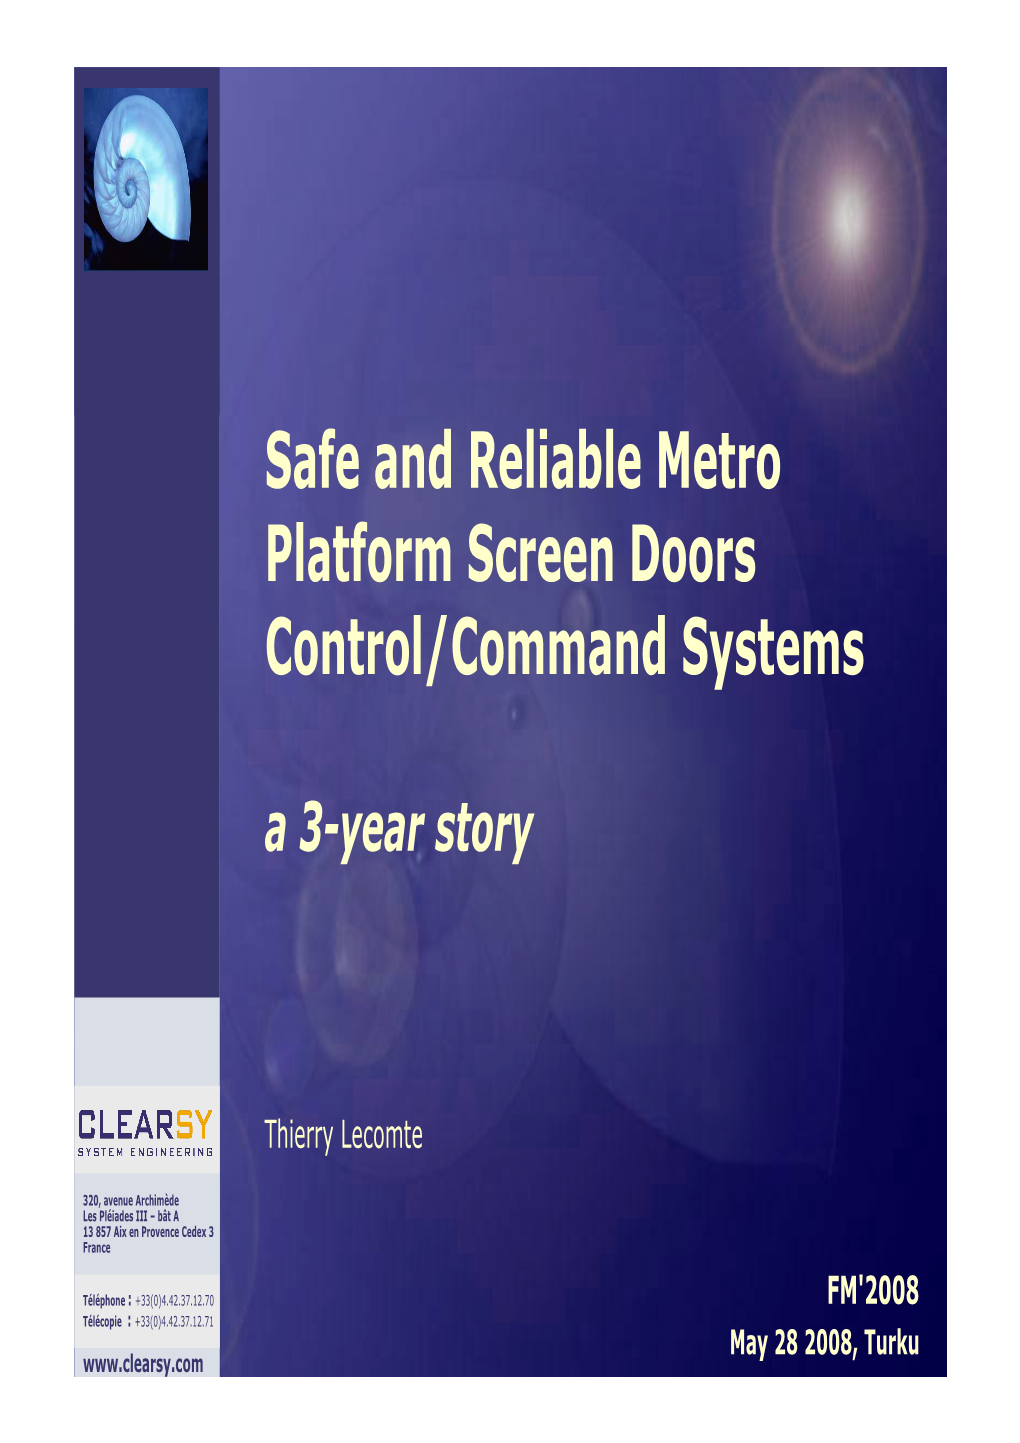 Safe and Reliable Metro Platform Screen Doors Control/Command Systems